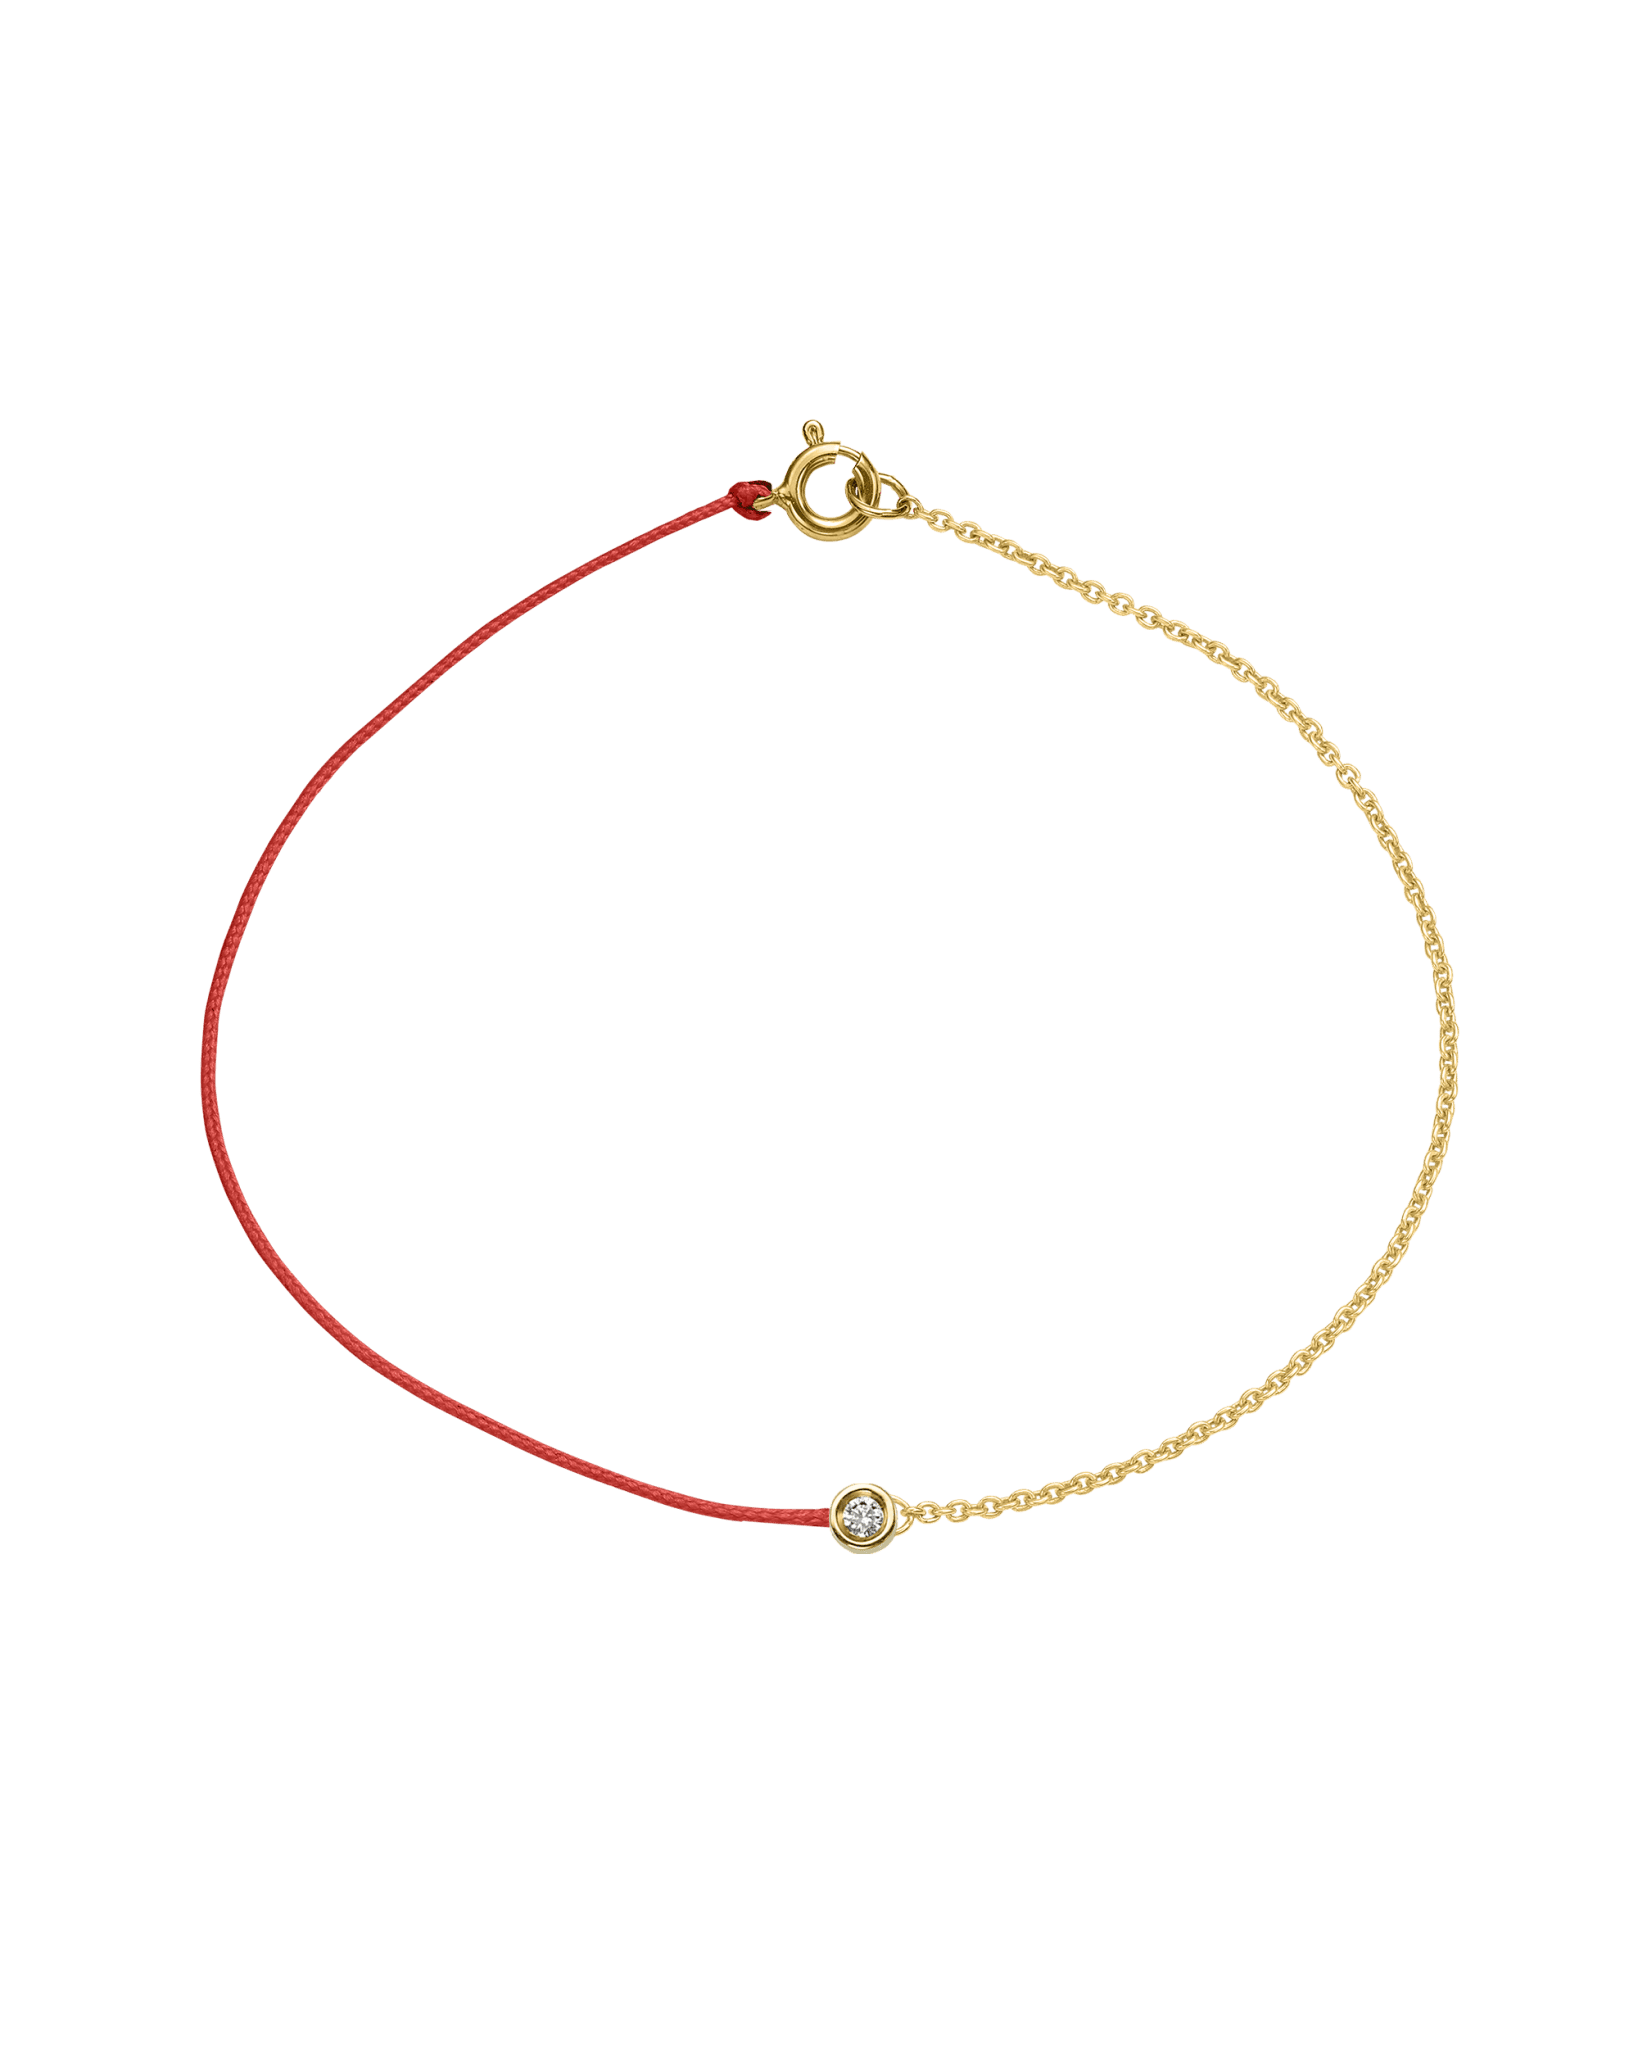 The Half Chain String of Love - 14K Yellow Gold